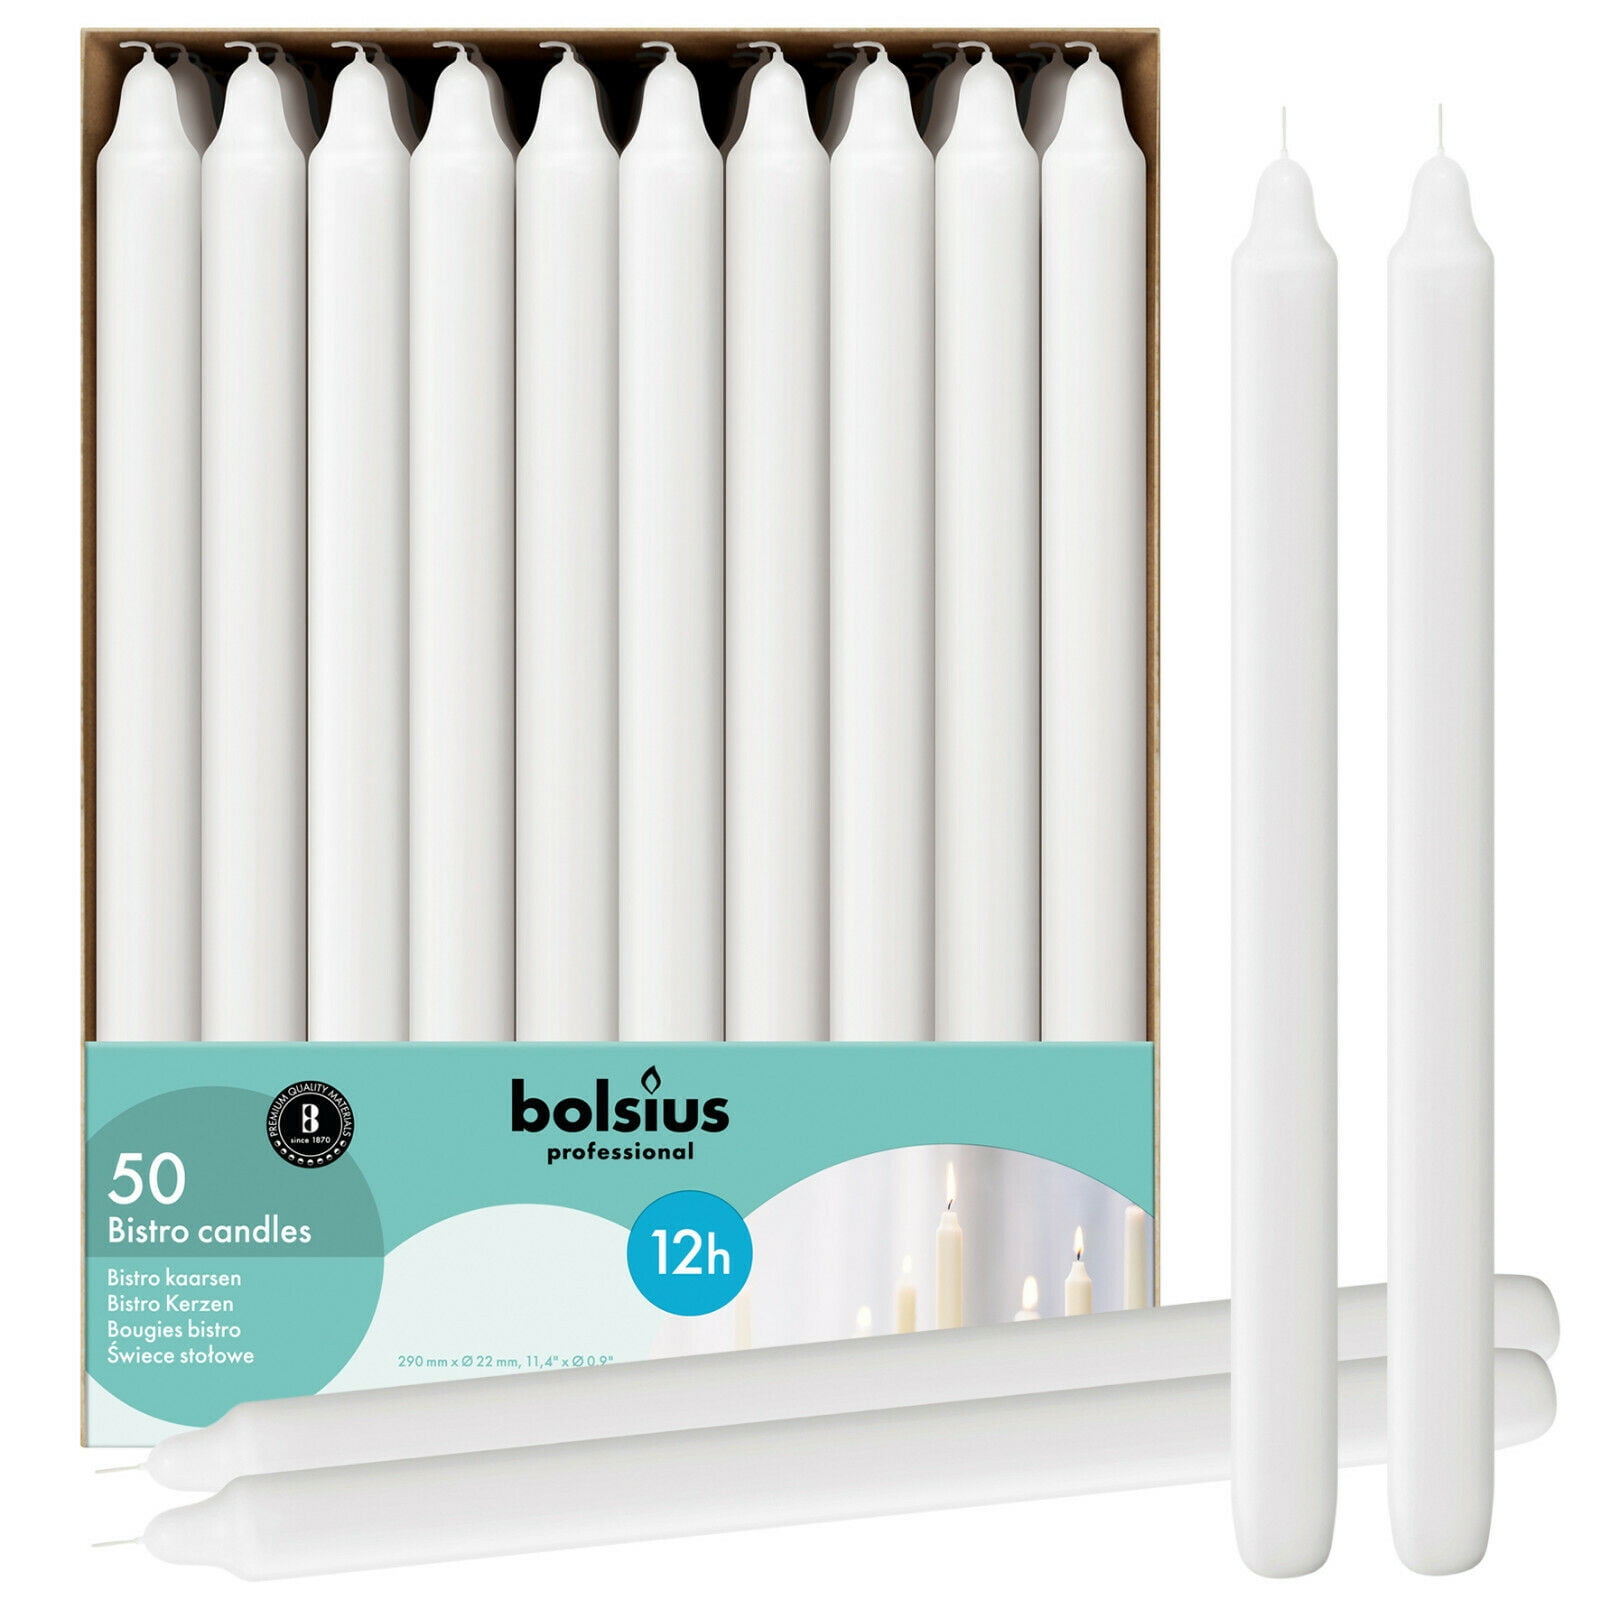 burns very nice Bolsius Ivory Taper Candles 30 in a box 10 Inch Taper Candle 